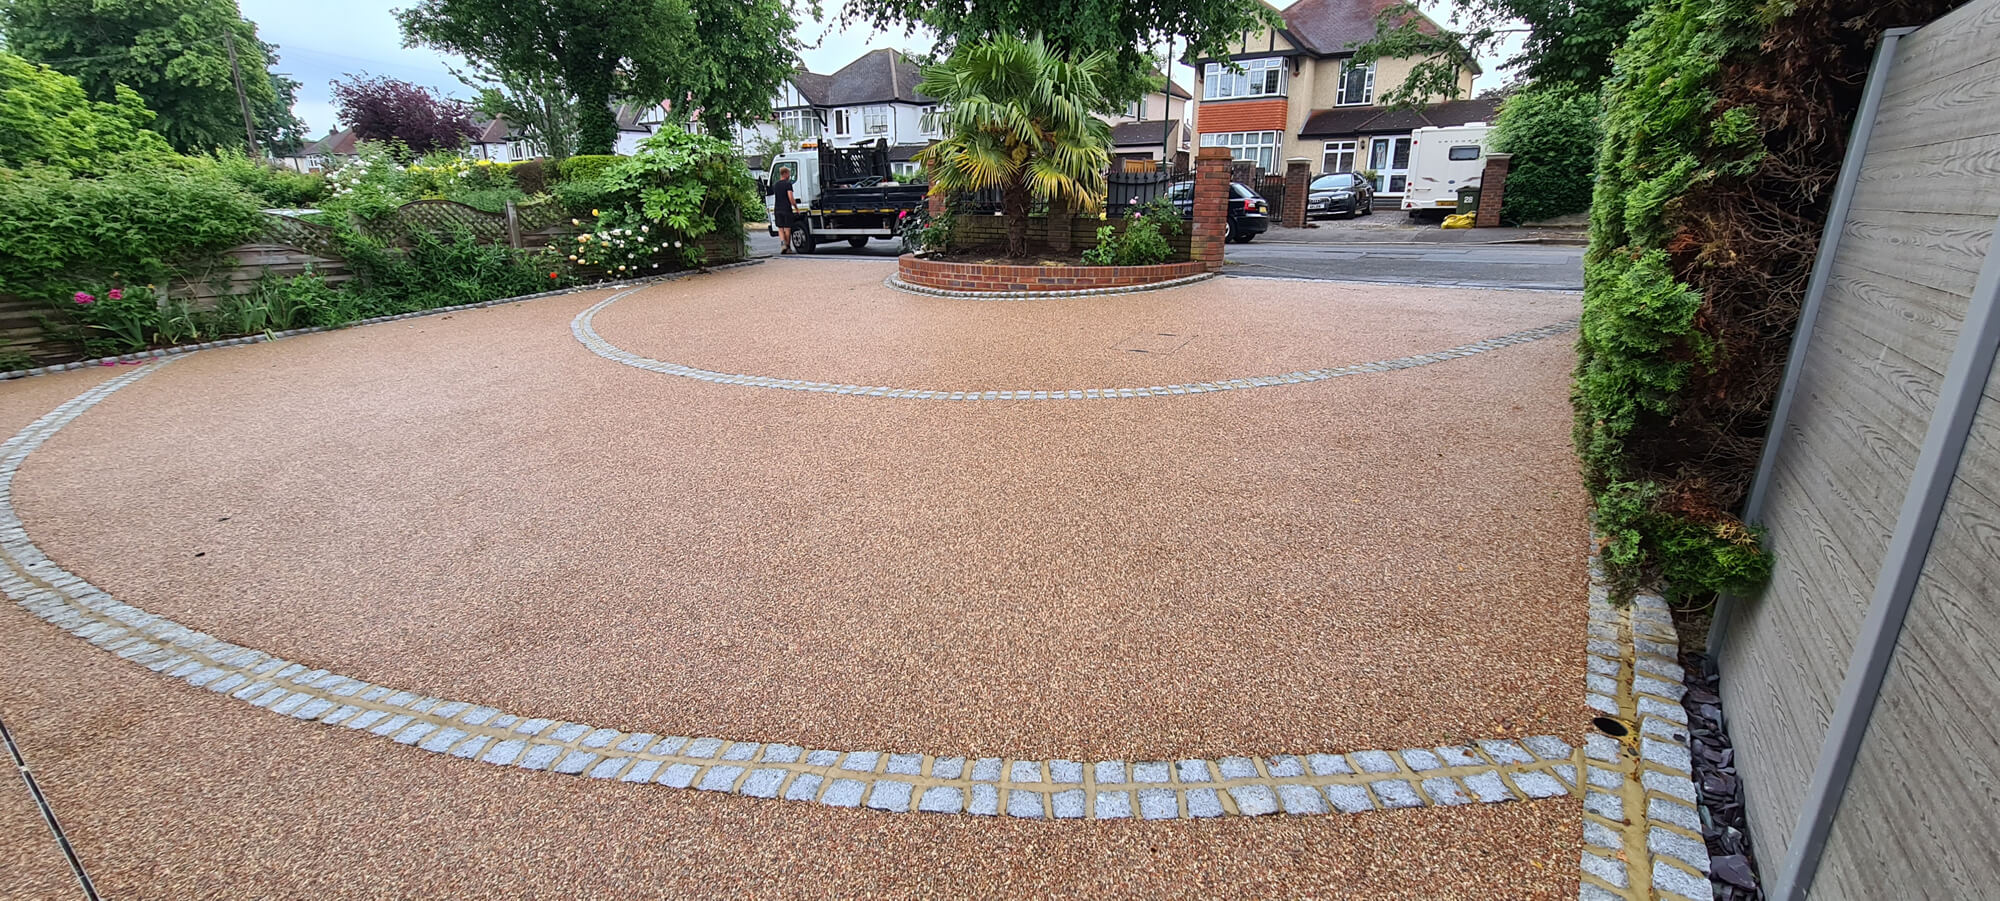 Enhance Your Curb Appeal with a Resin Driveway